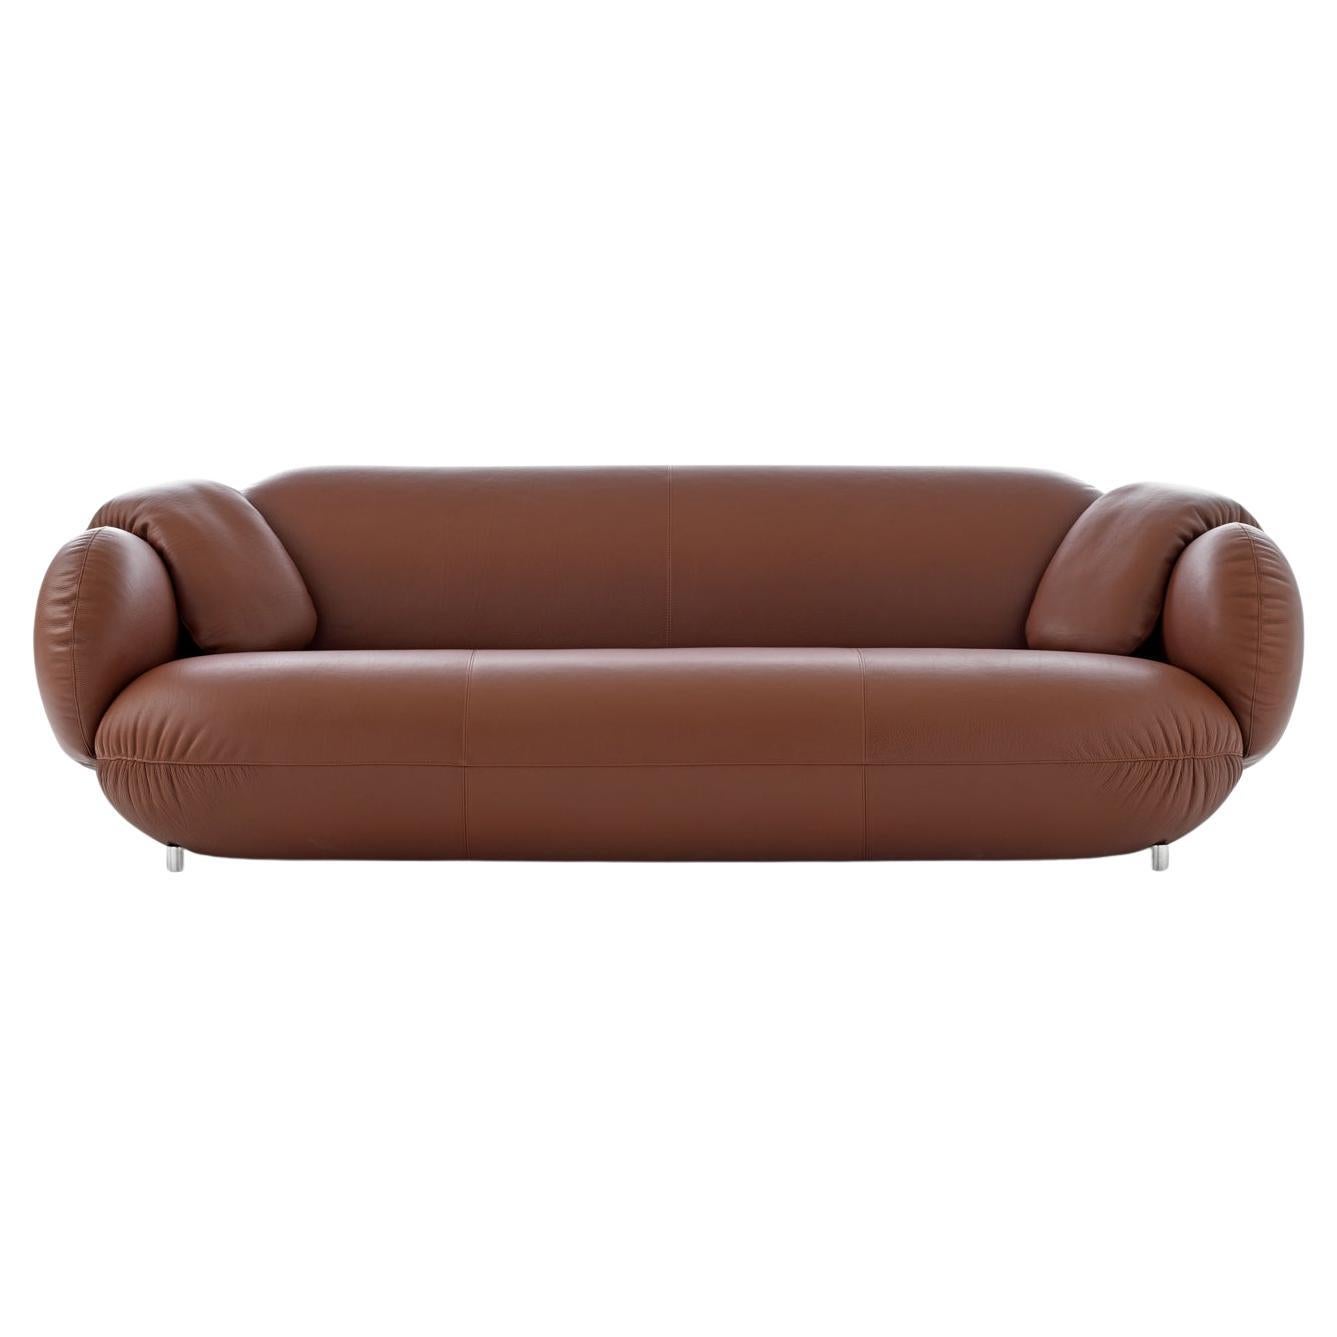 Light Brown Pulla 3-Seater Sofa Designed By Studio Truly Truly for Leolux For Sale